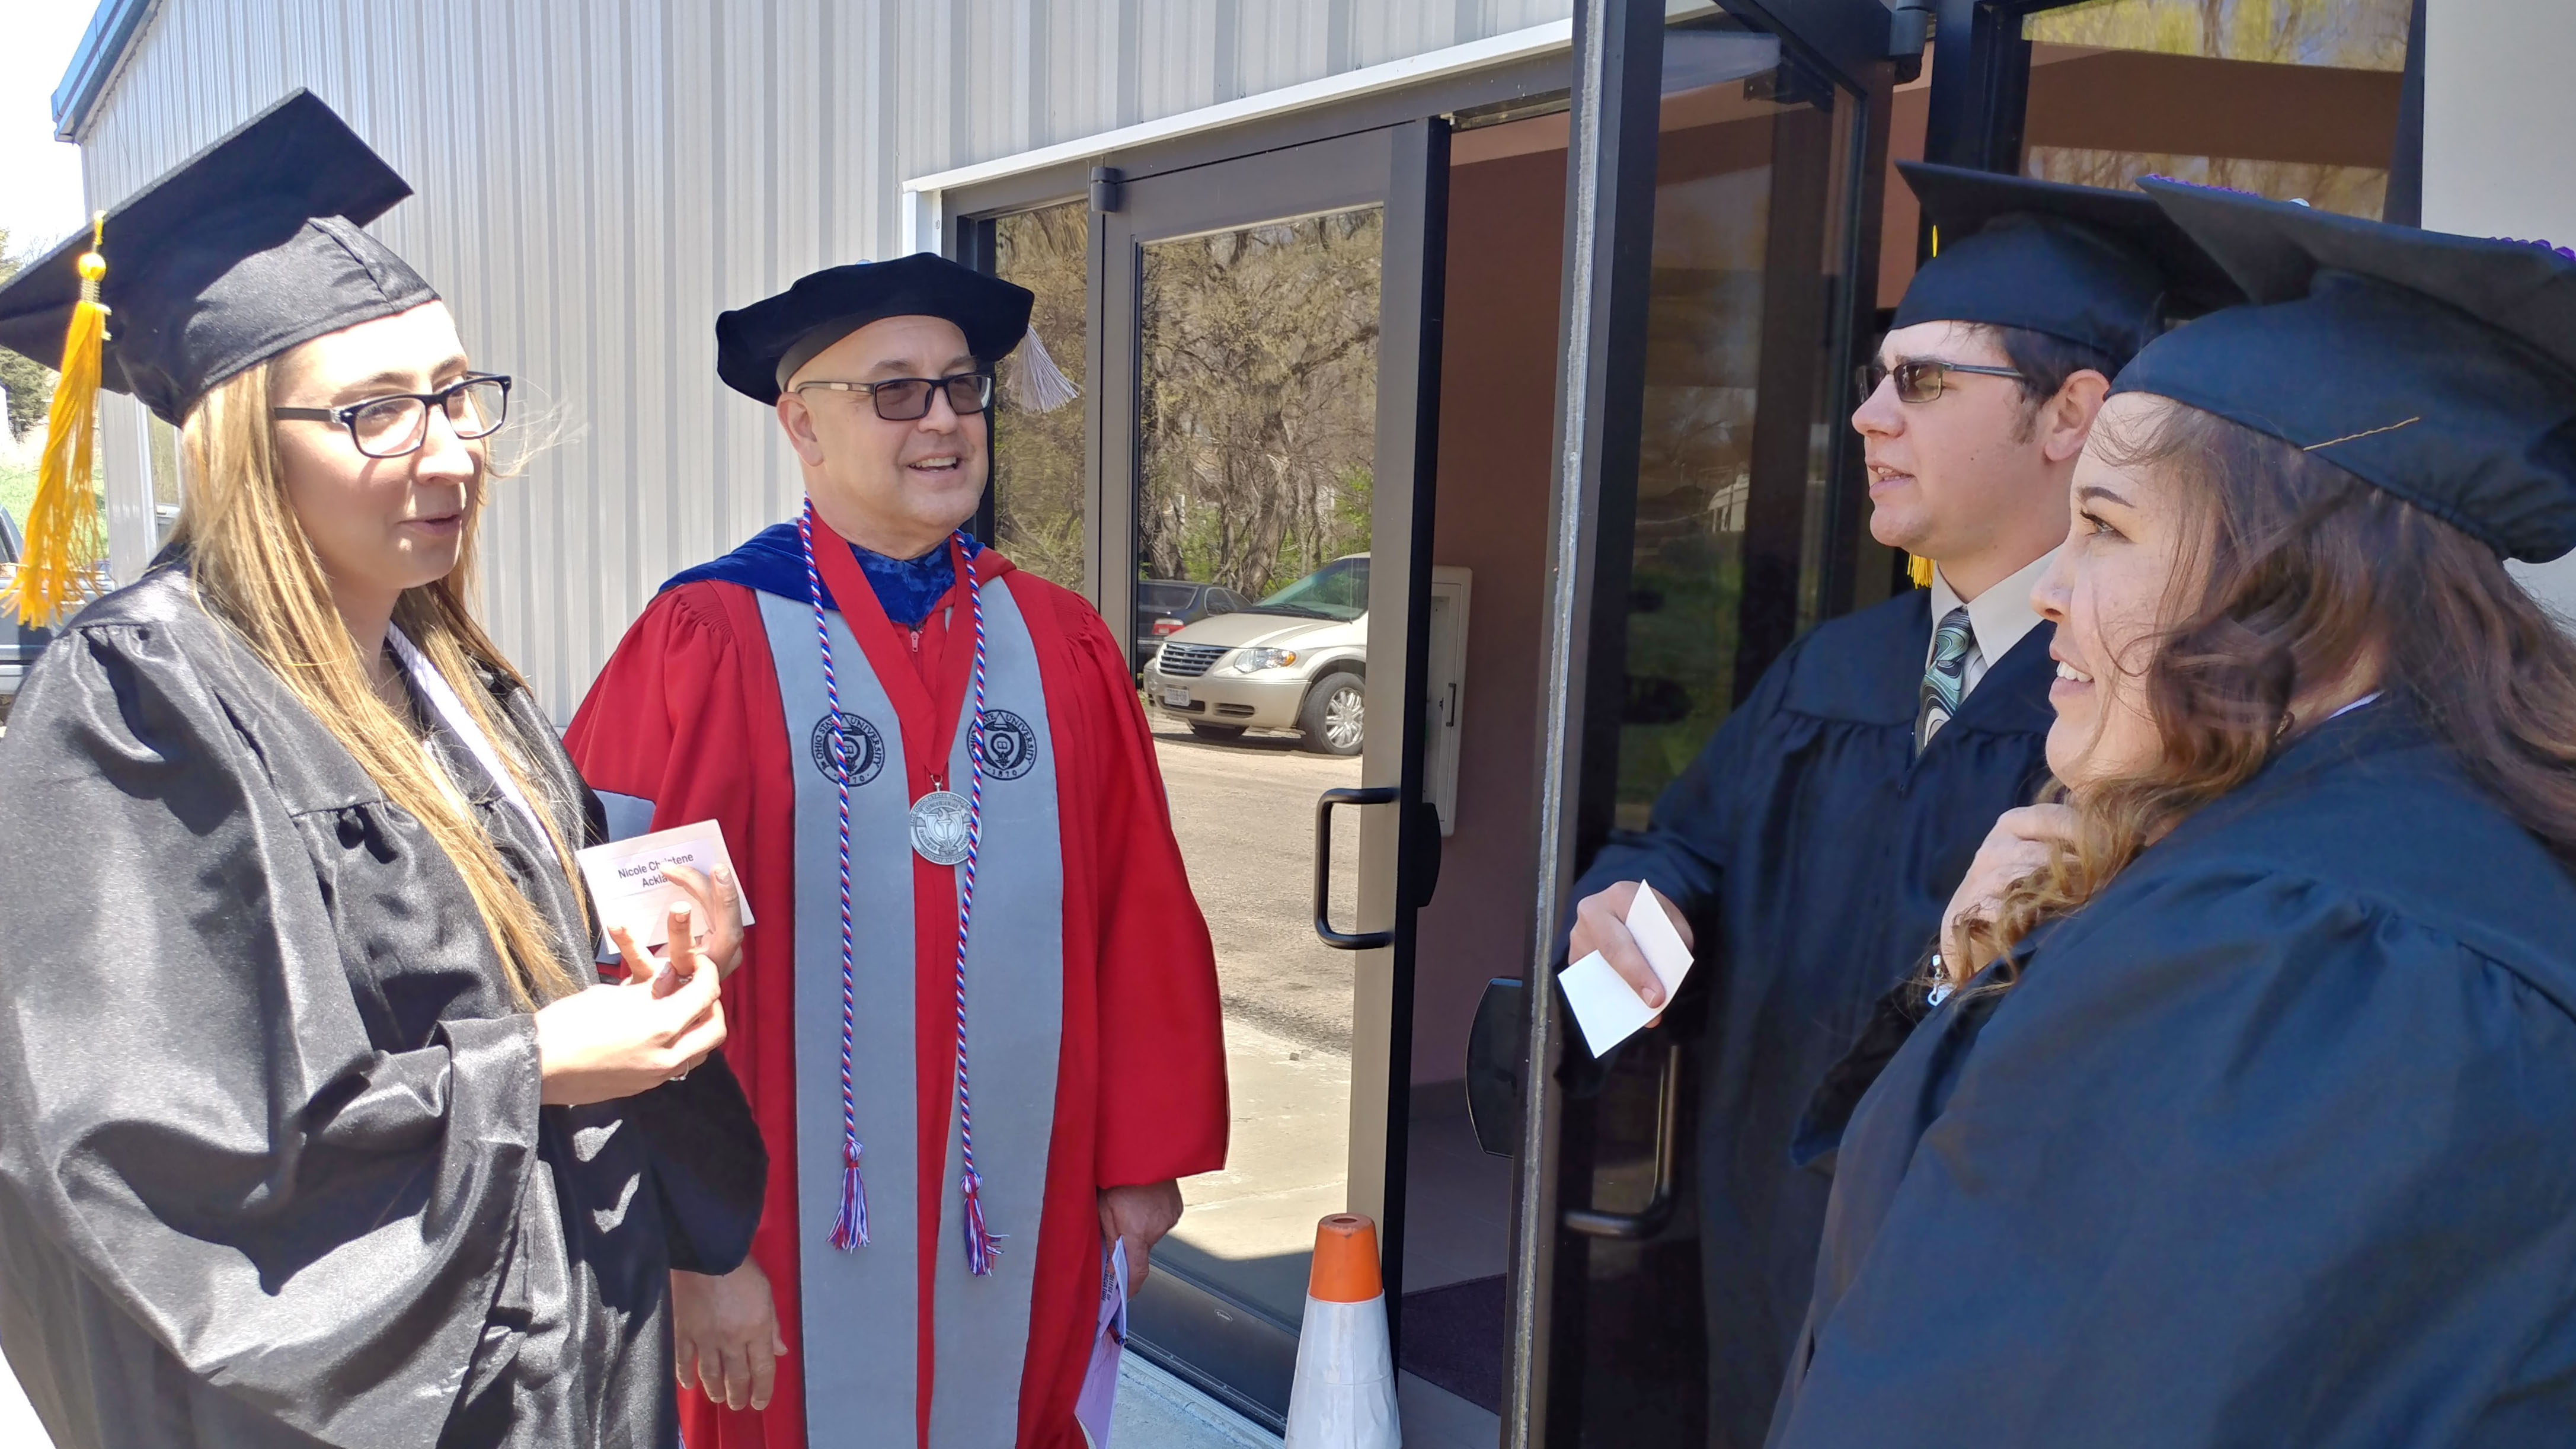 Three graduates from the Class of 2019 at the Nebraska College of Technical Agriculture chat with University of Nebraska Vice President Mike Boehm prior to commencement in Curtis. In 2020, graduation was a virtual event. (Crawford / NCTA file photo)